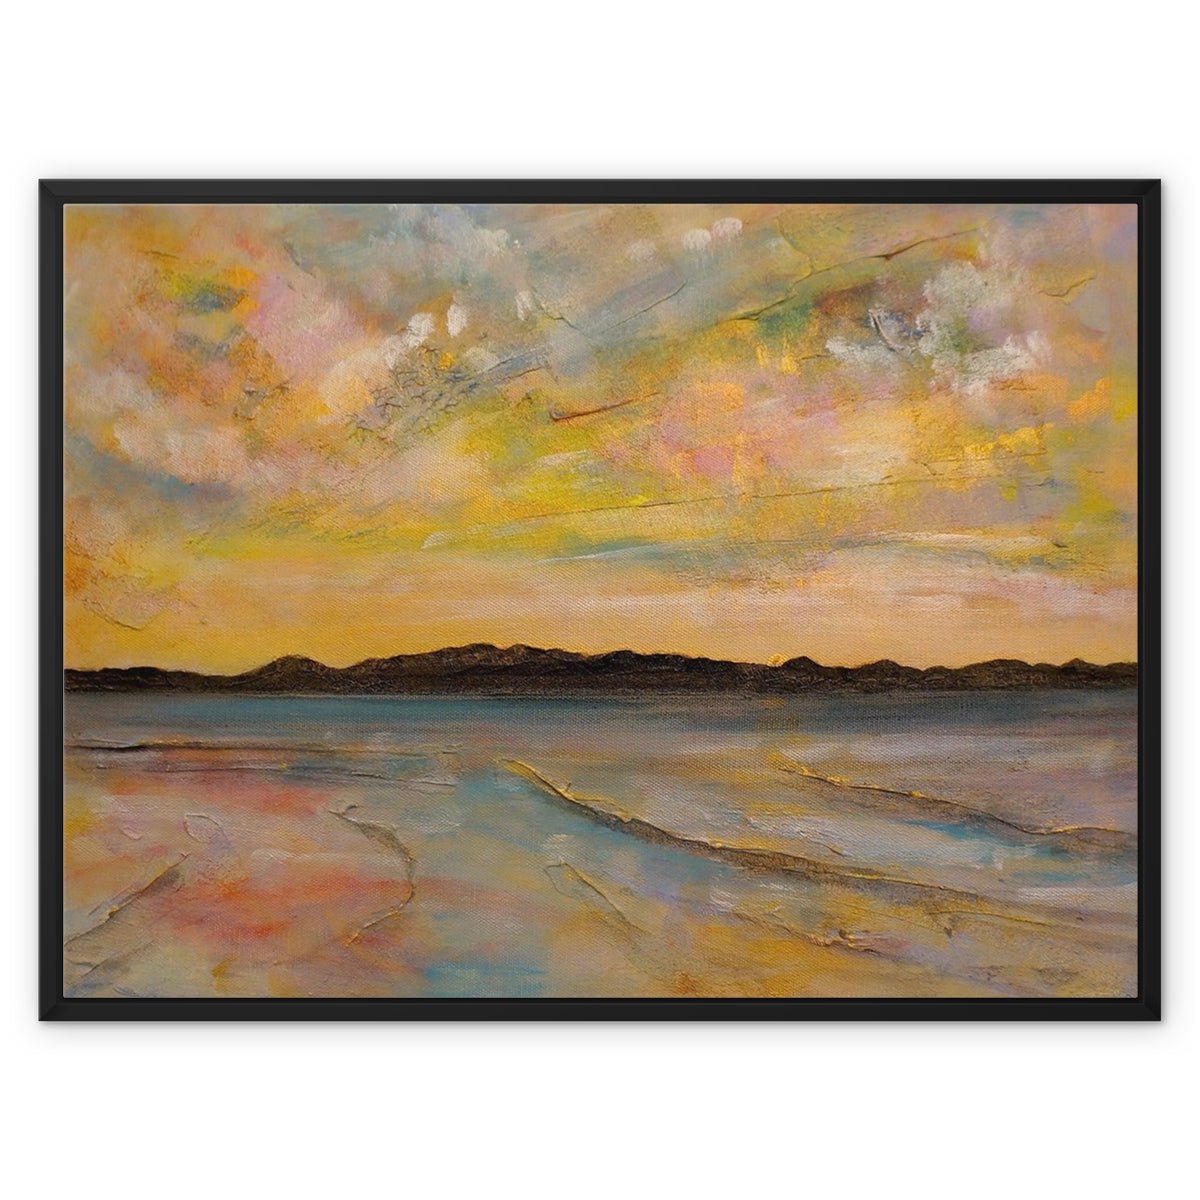 Vallay Island North Uist Painting | Framed Canvas From Scotland-Floating Framed Canvas Prints-Hebridean Islands Art Gallery-32"x24"-Paintings, Prints, Homeware, Art Gifts From Scotland By Scottish Artist Kevin Hunter